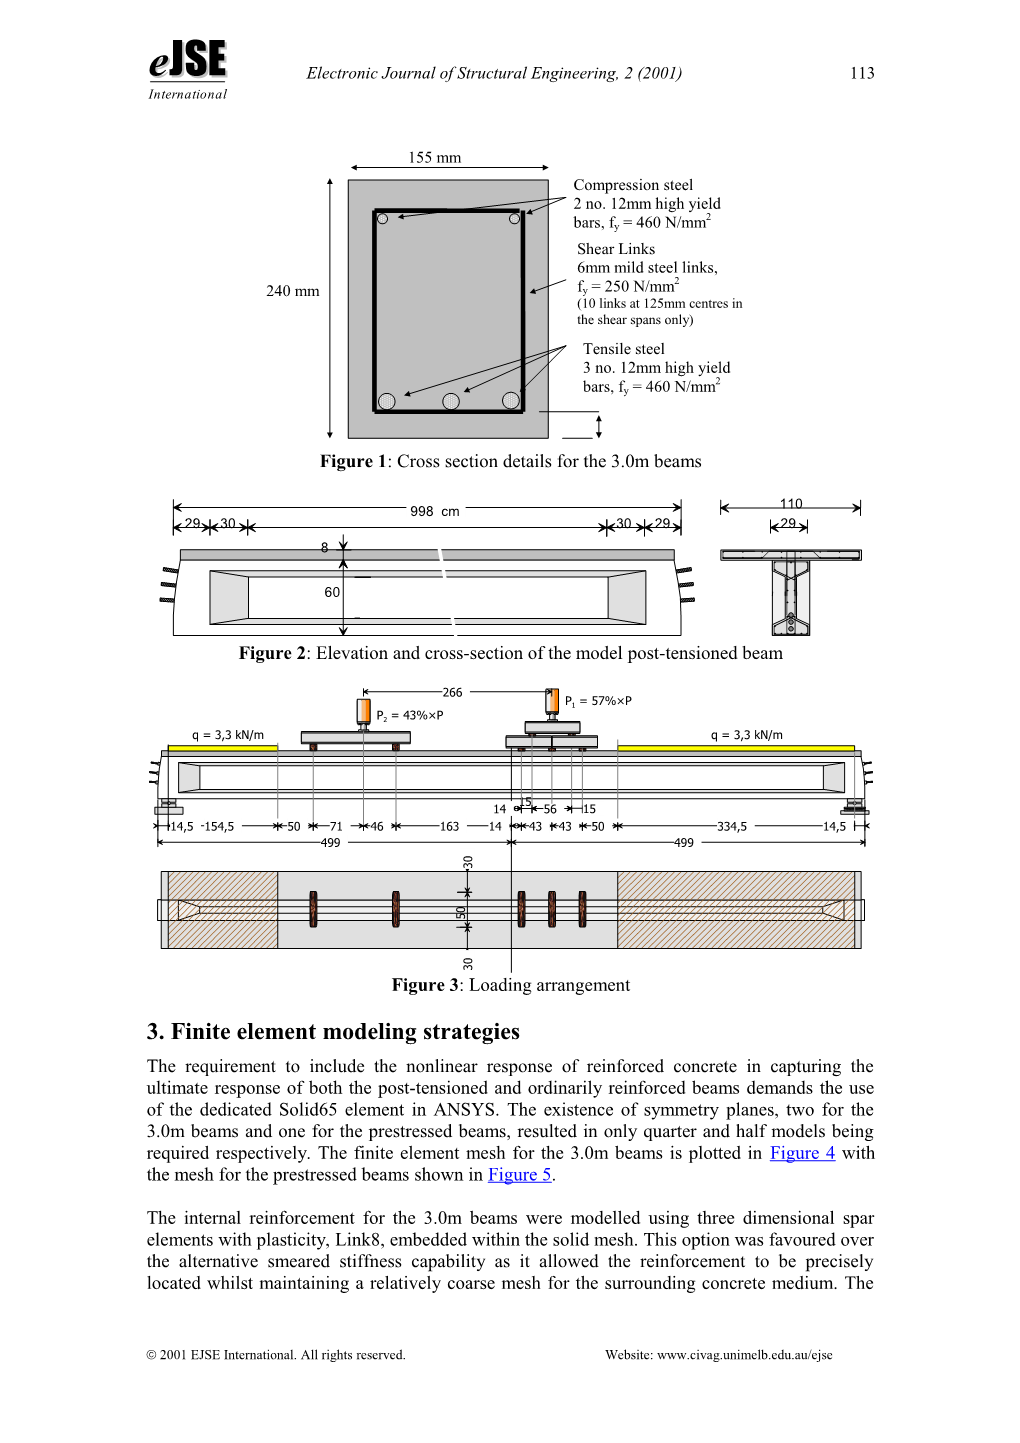 Nonlinear Models Of Reinforced And Post-Tensioned Concrete Beams